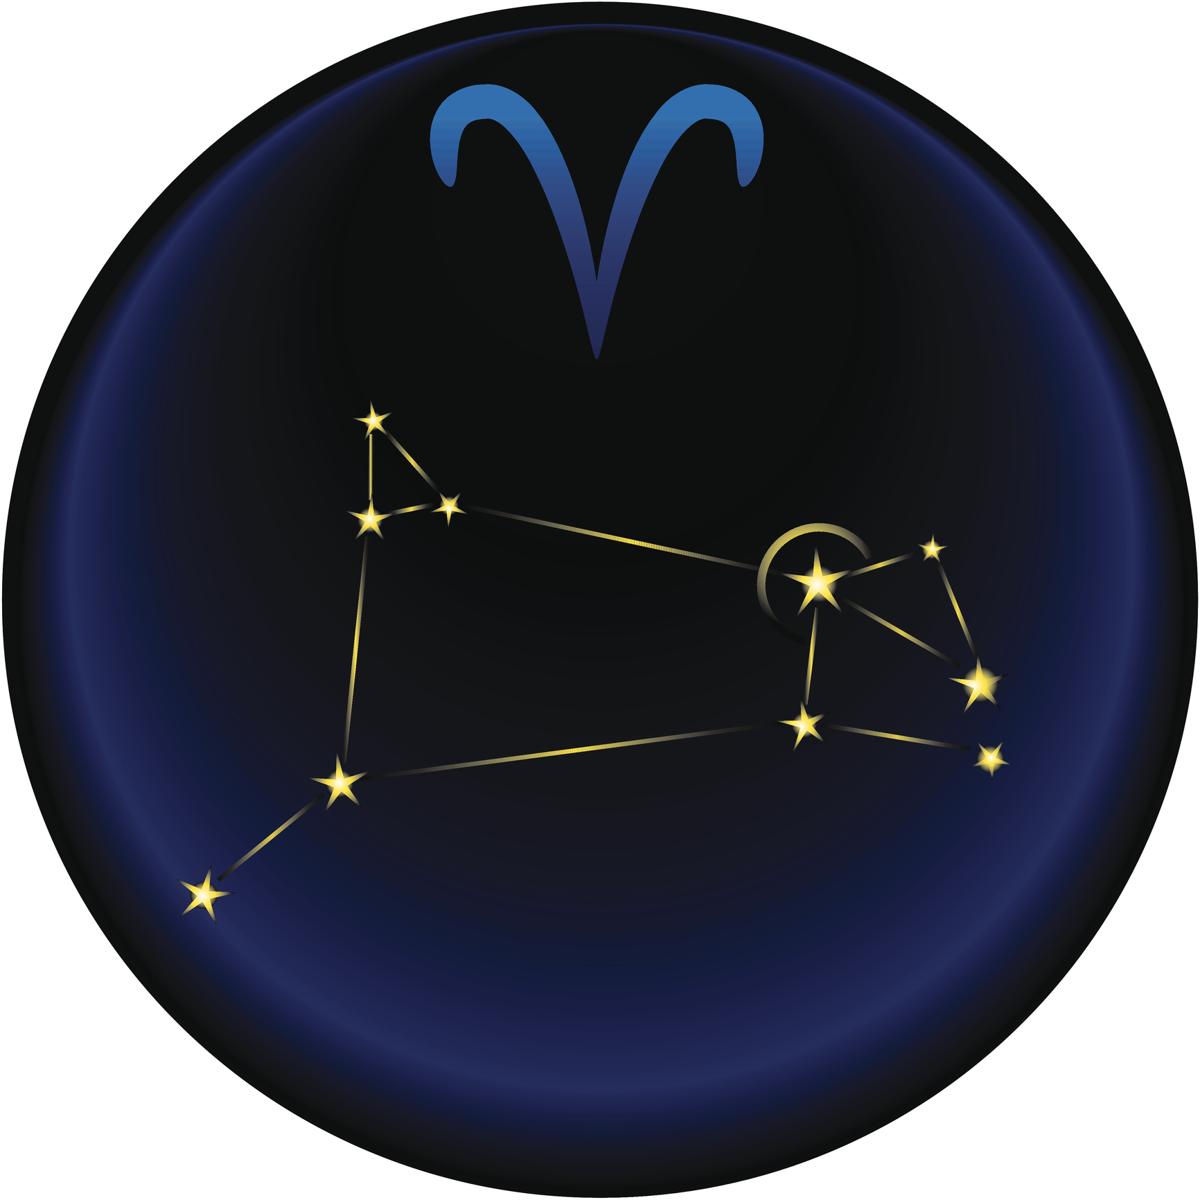 aries astrological sign